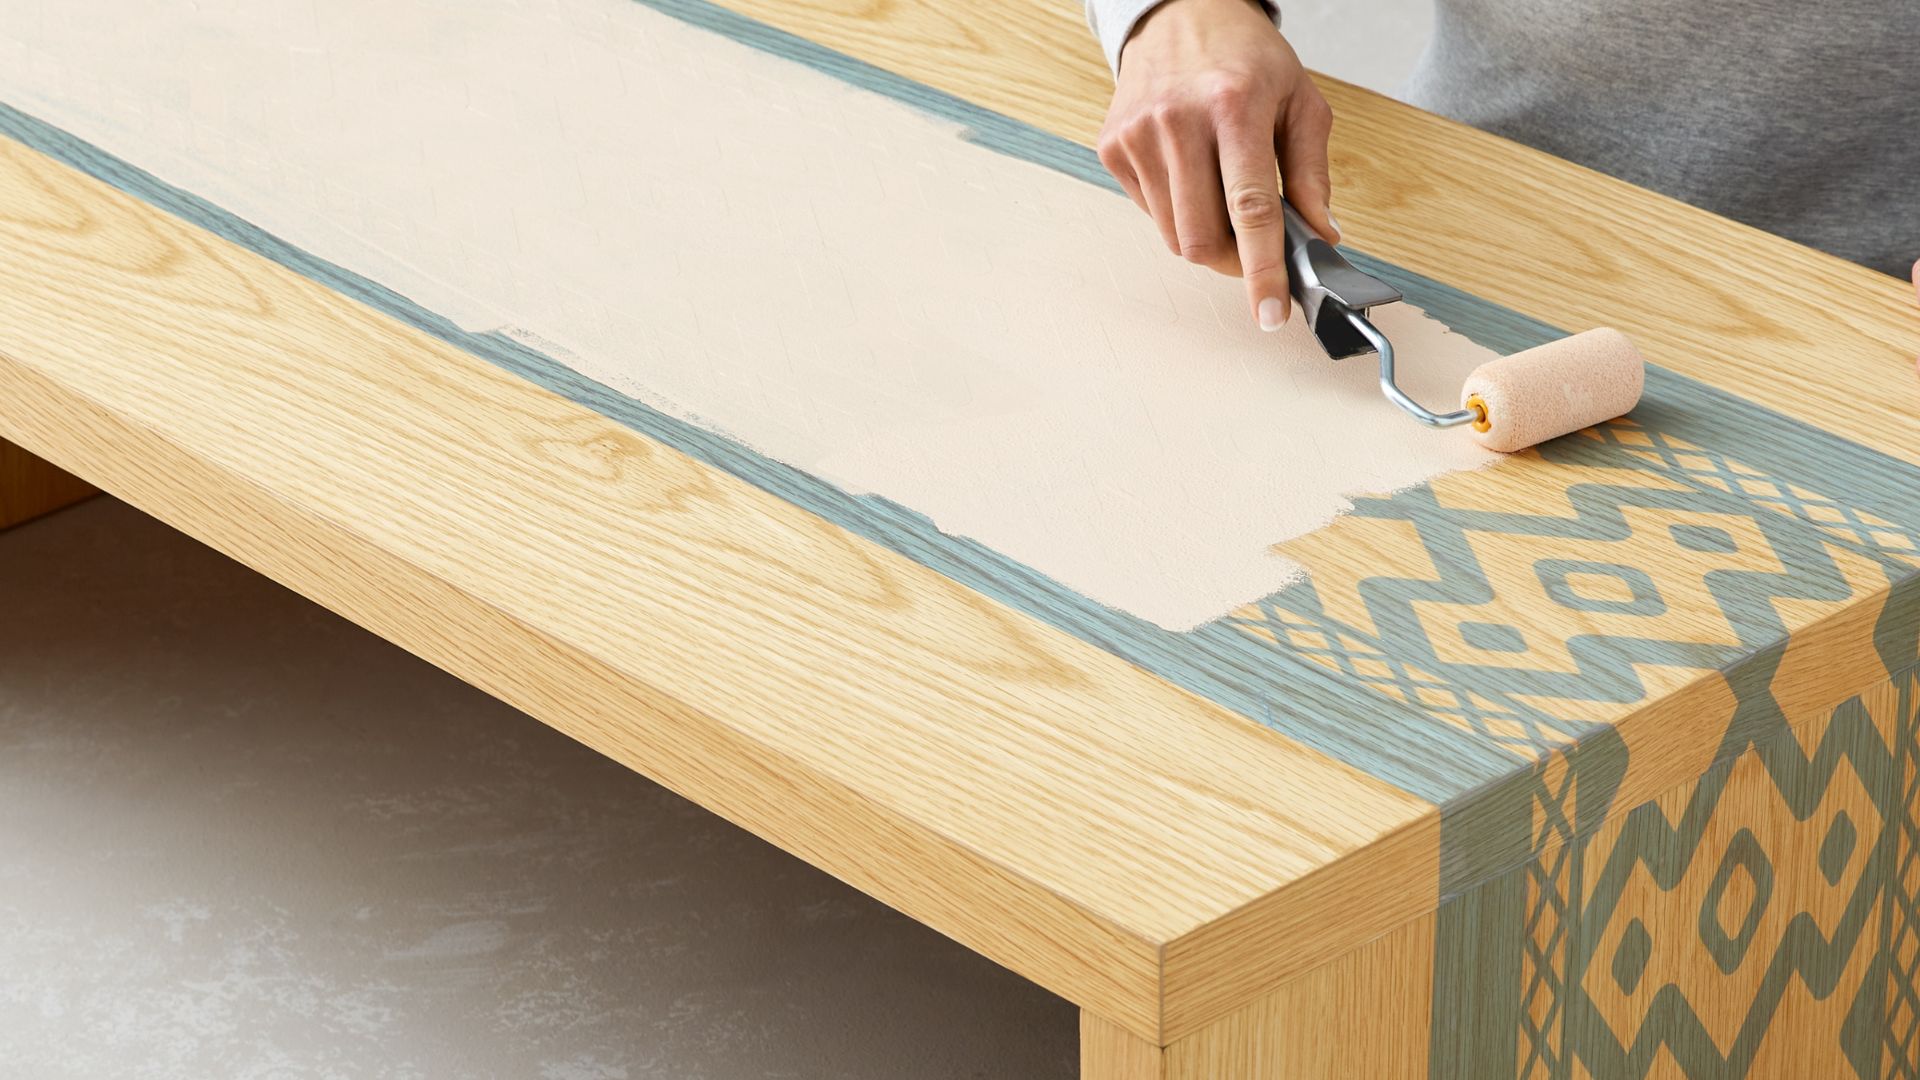 Upcycle furniture by printing and painting your own designs